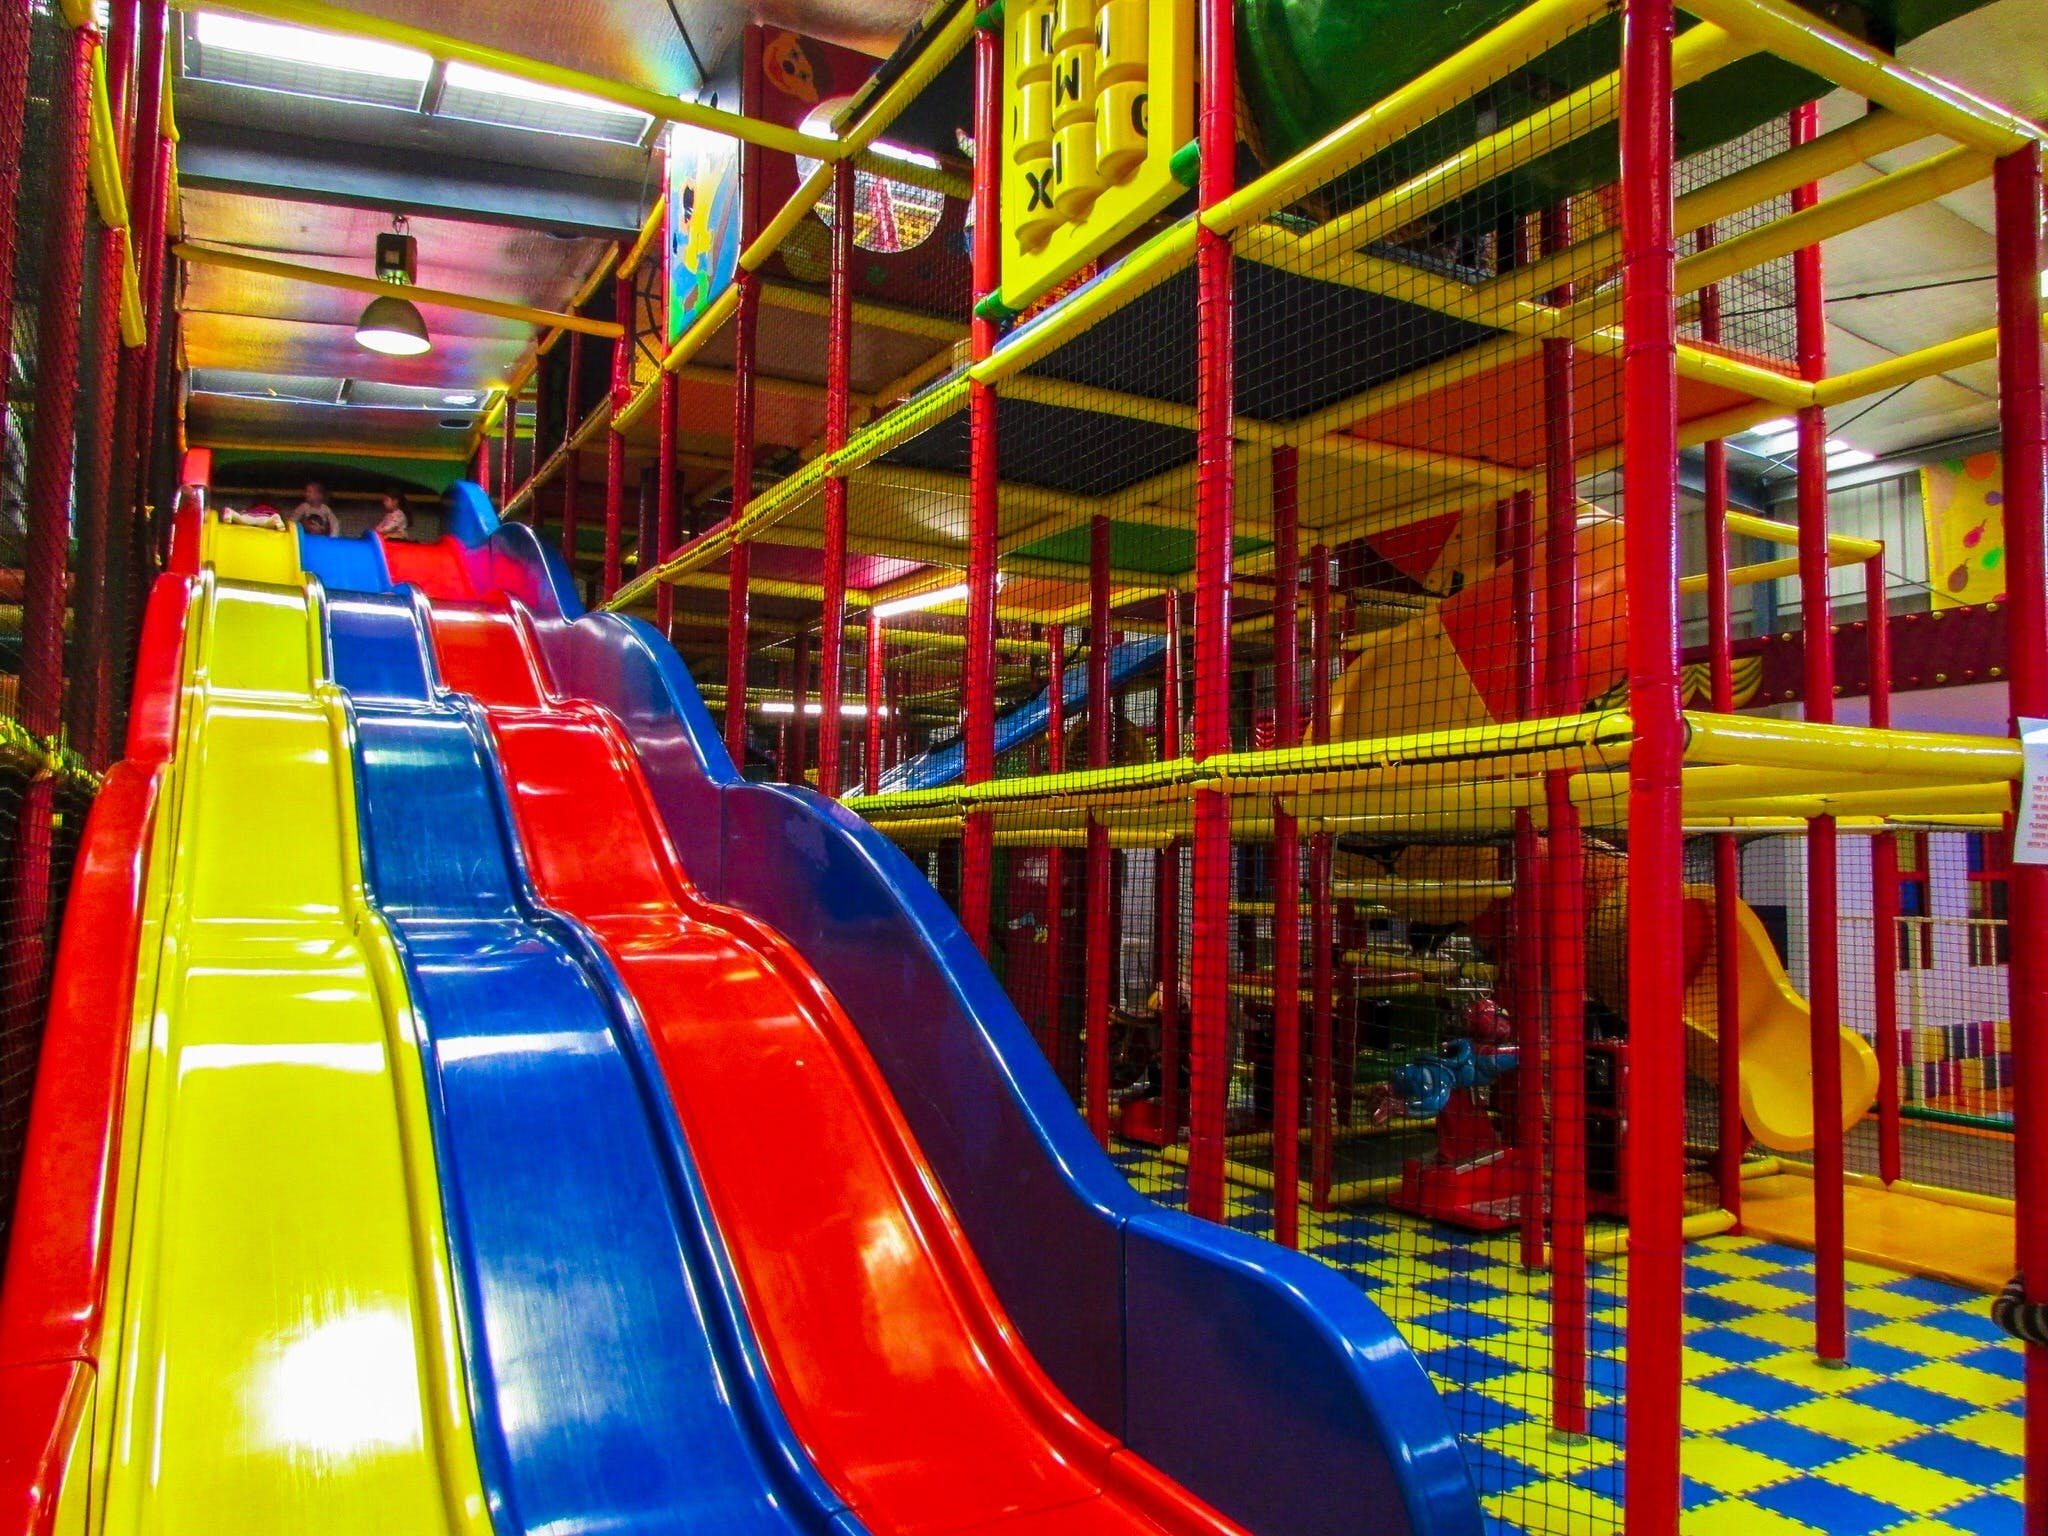 Kidz Shed Indoor Play Centre and Cafe - Accommodation in Brisbane